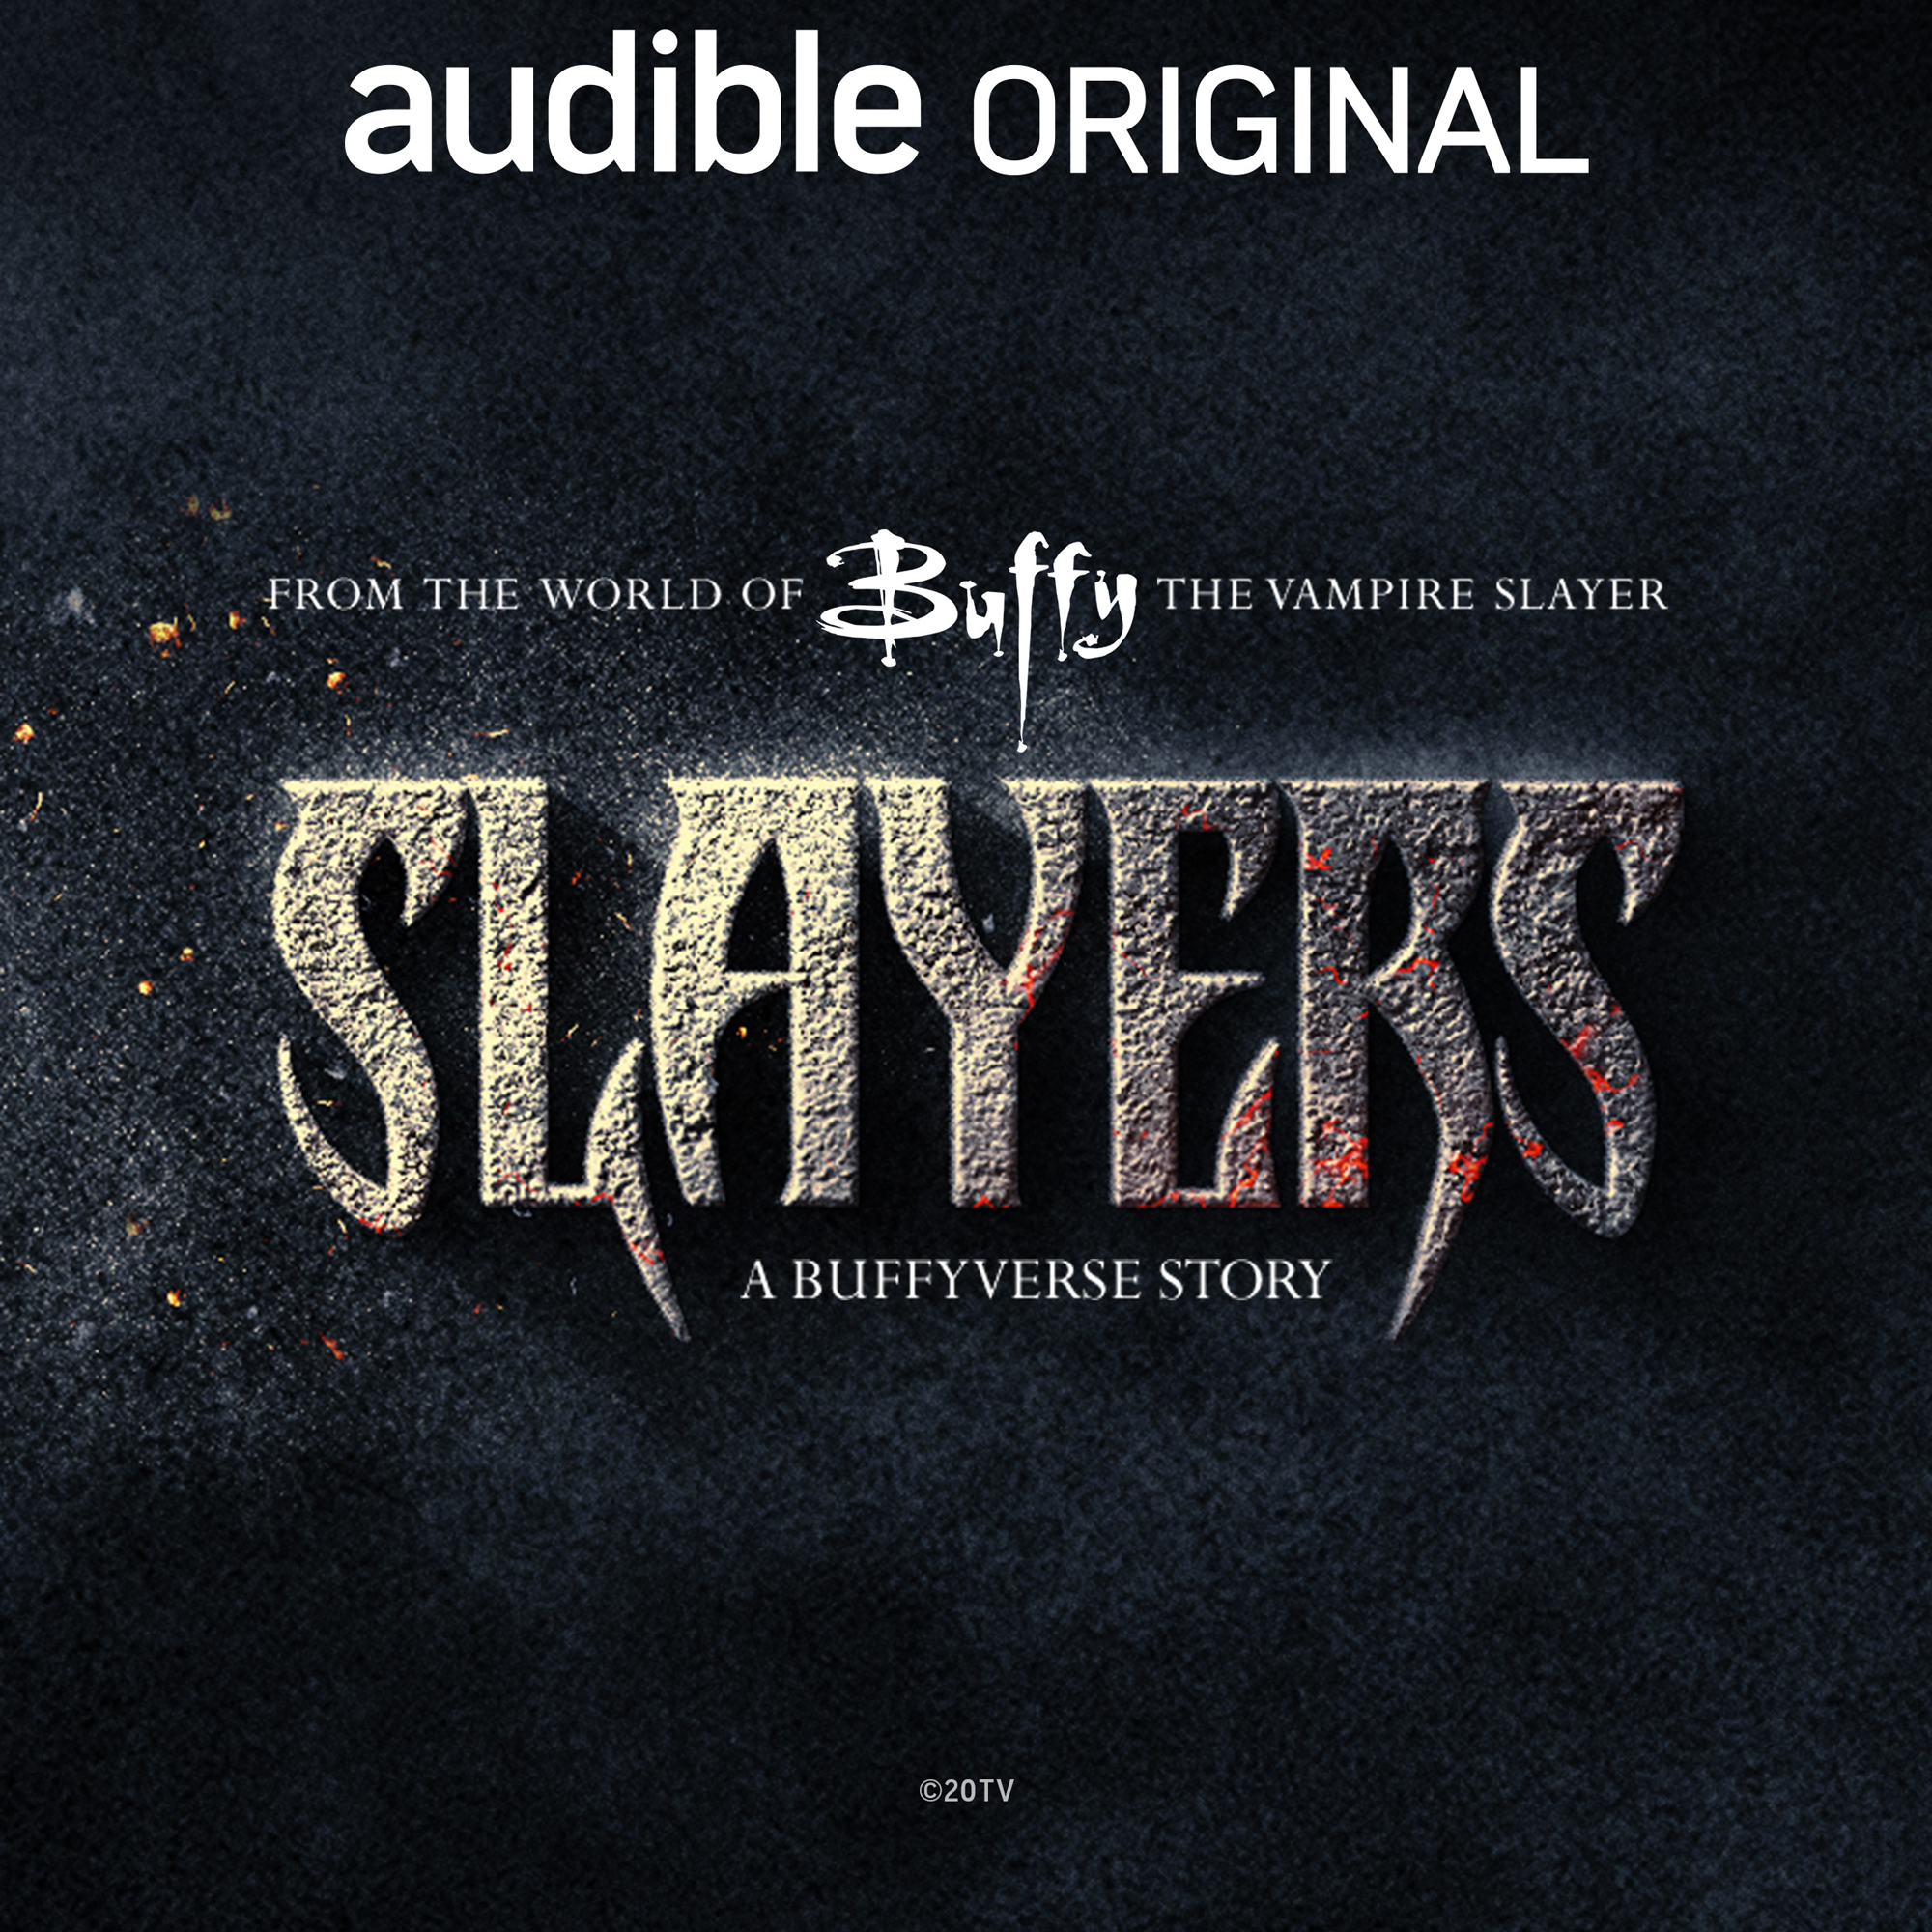 Project Slayers News (@NewsSlayers) / X